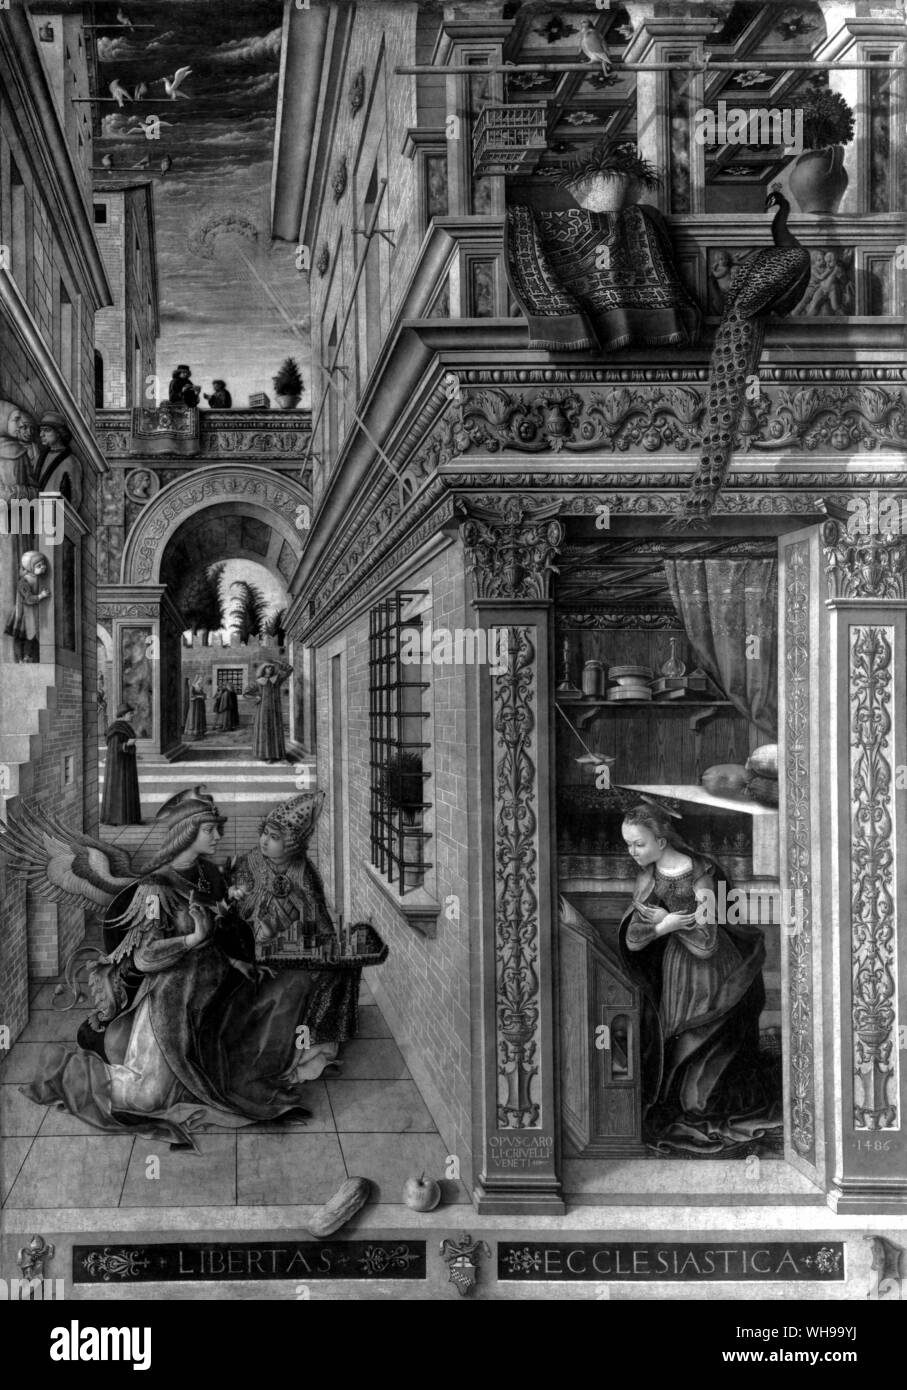 The Annunciation by Carlo Crivelli (active 1457-1493).  The Anatolian carpet (so-called Holbein type) on the balcony is a symbol of luxury. Stock Photo